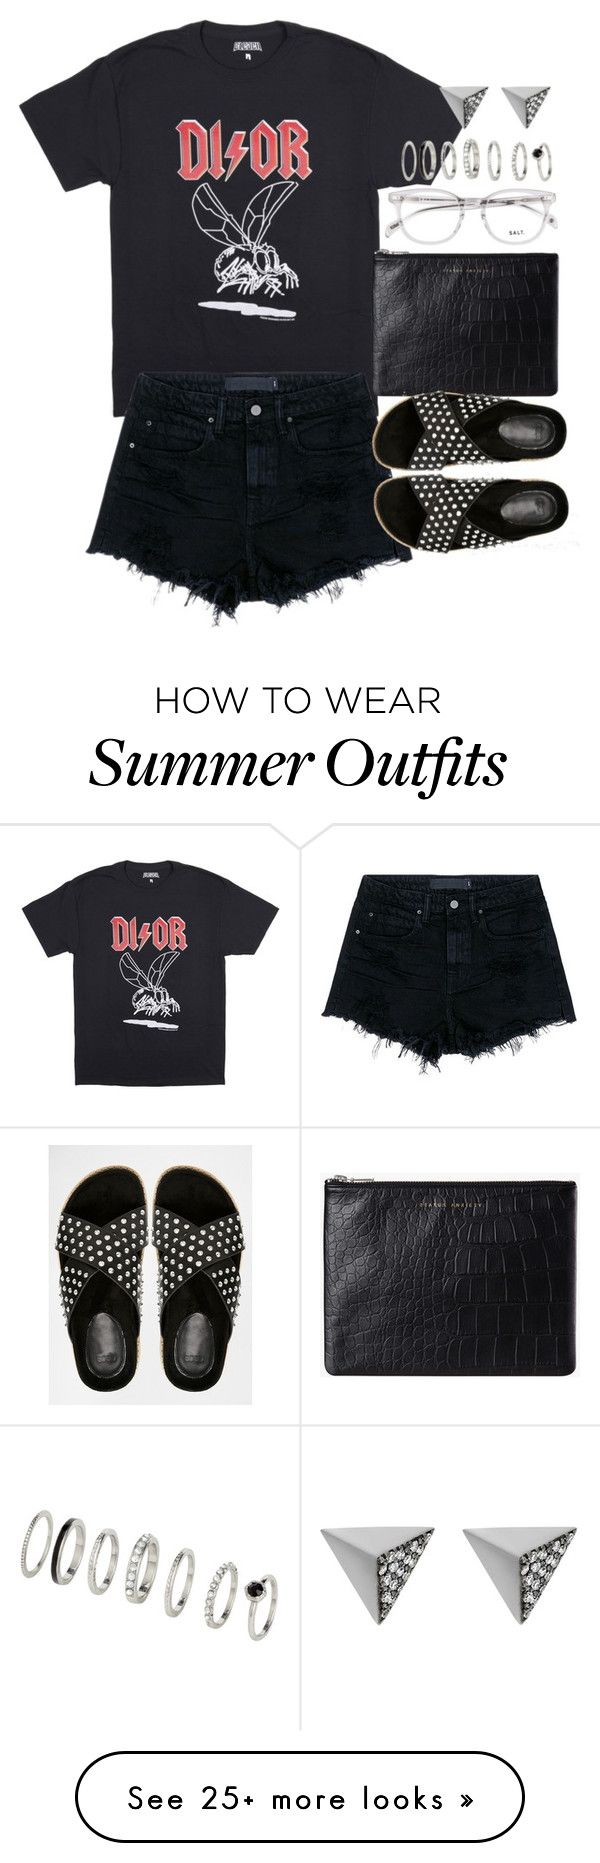 "Outfit for summer with a graphic tee and shorts" by ferned on Polyvor...